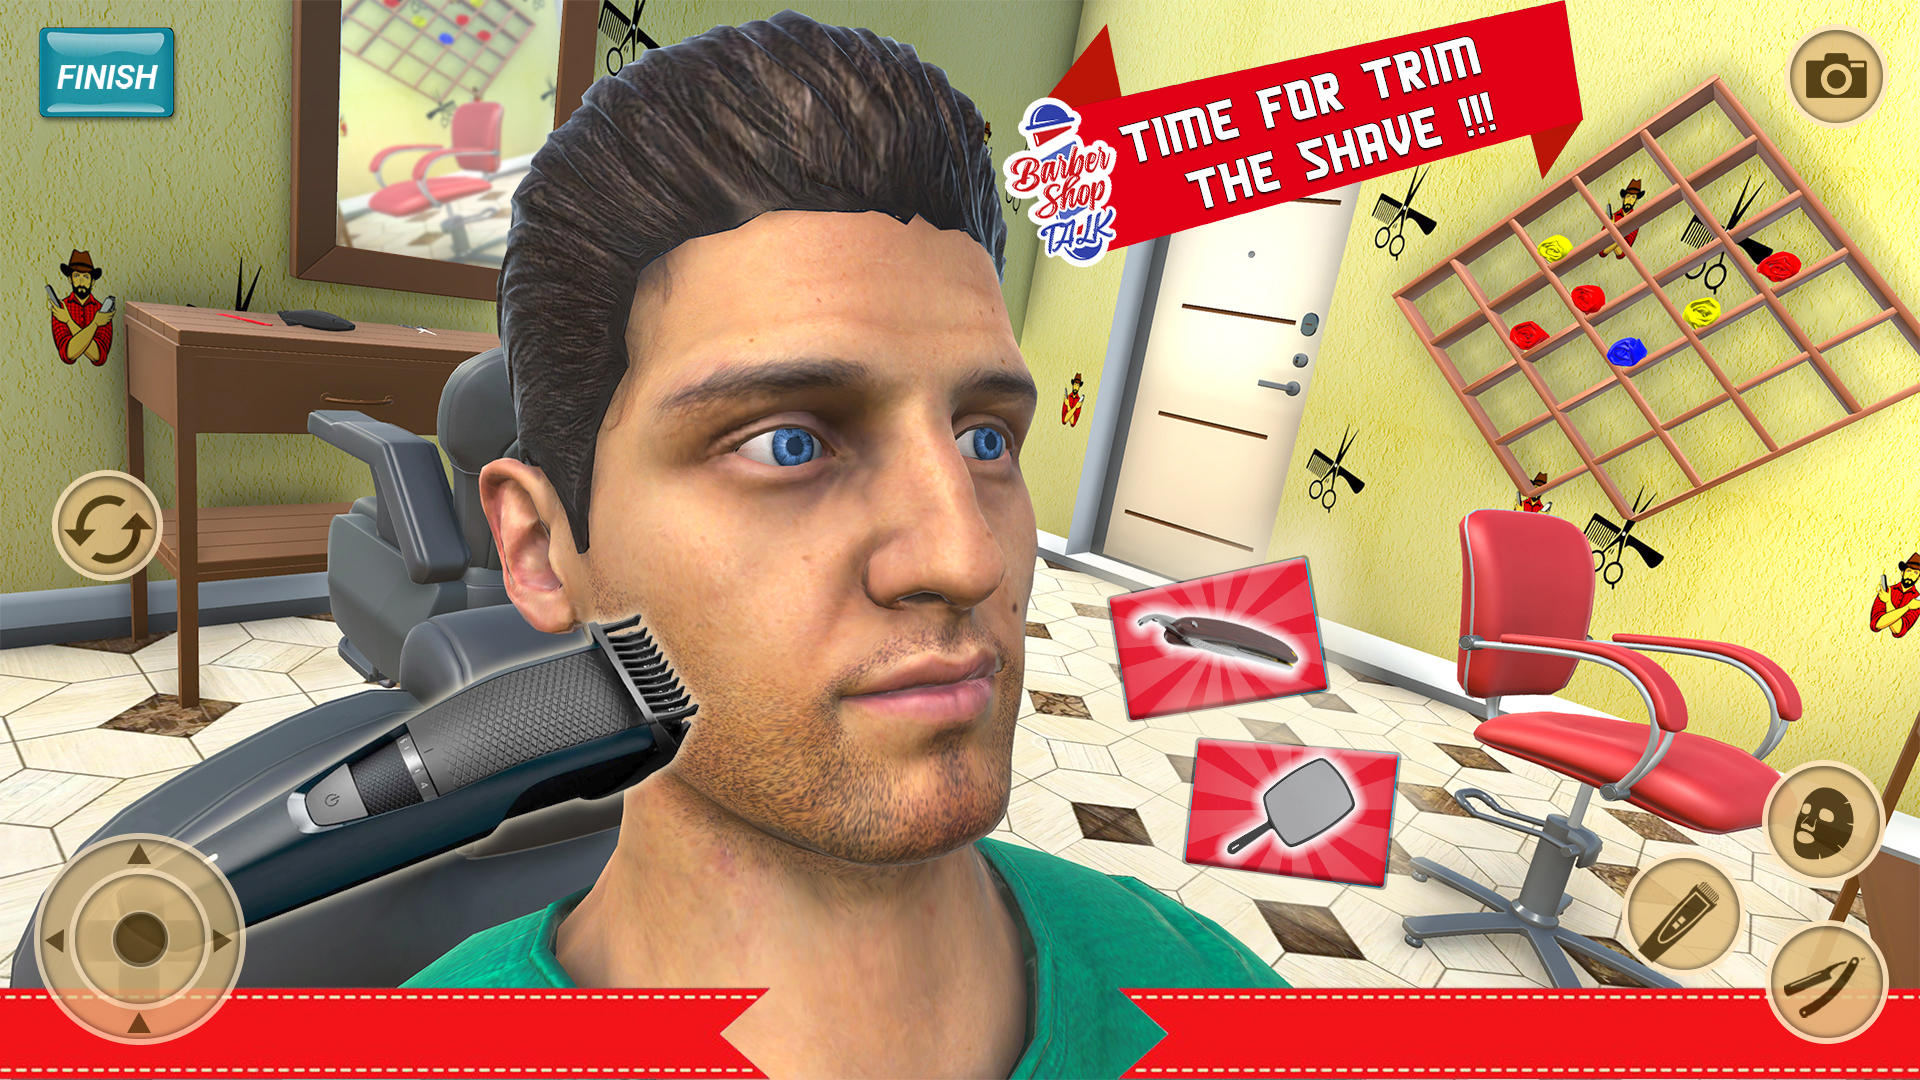 Barber Chop APK (Android App) - Free Download